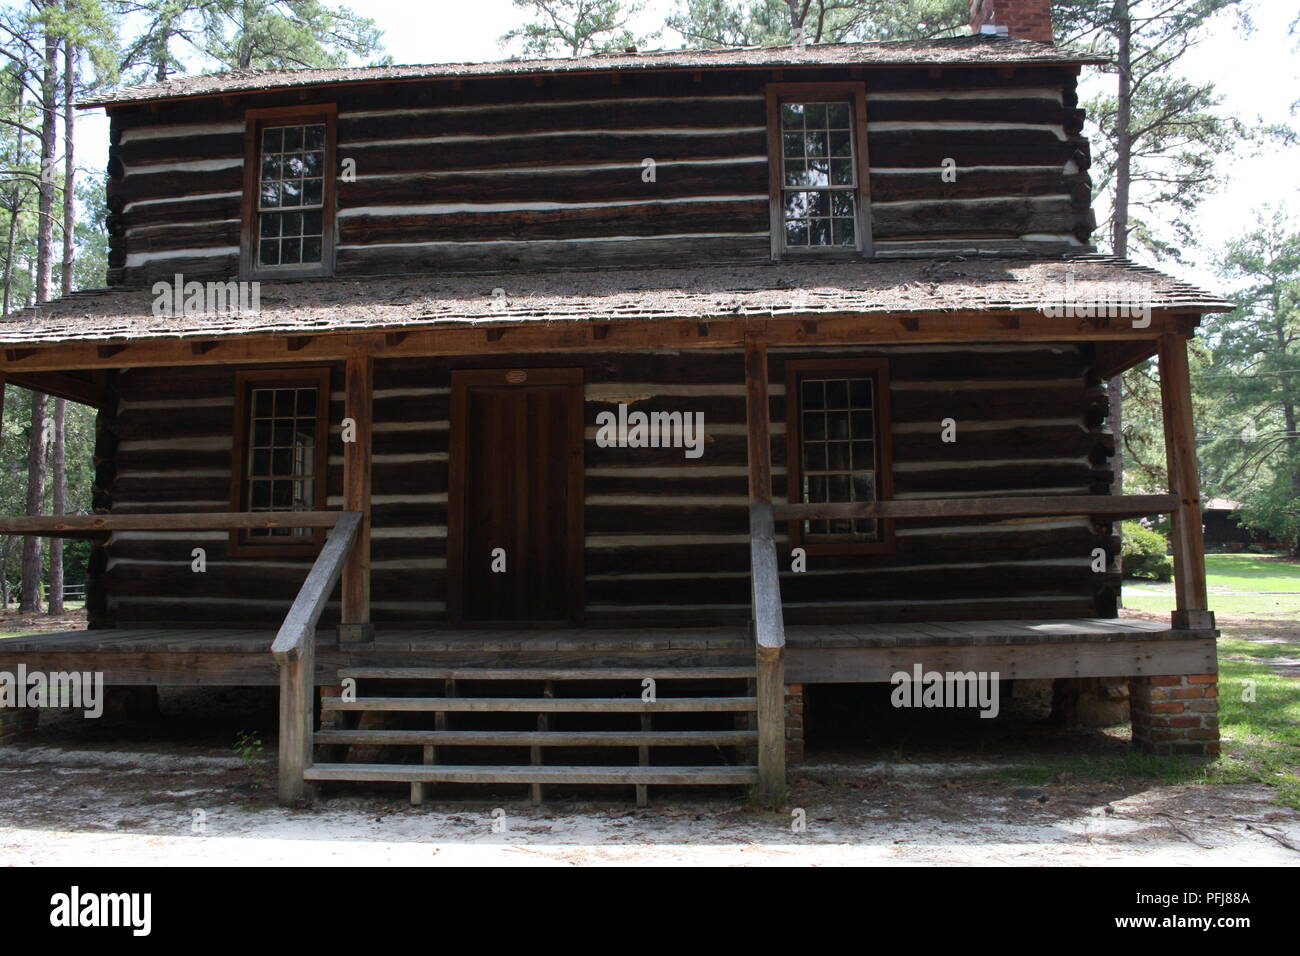 This Old Cabin Stock Photo